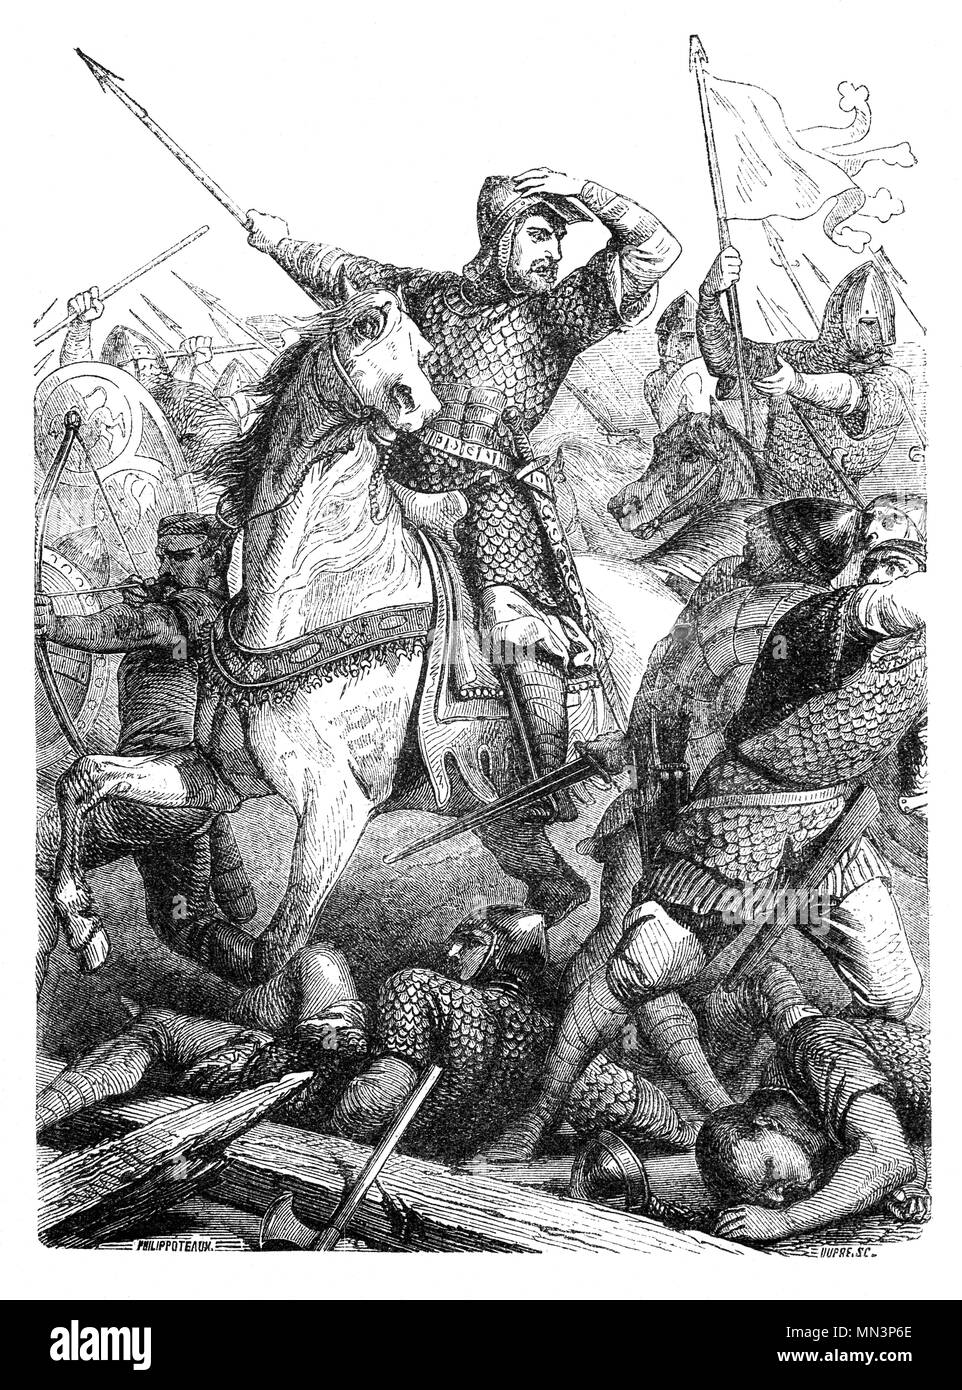 A scene from the Battle of Hastings fought on 14 October 1066 between the Norman-French army of William, the Duke of Normandy, and an English army under the Anglo-Saxon King Harold Godwinson, beginning the Norman conquest of England. It took place approximately 7 miles (11 kilometres) northwest of Hastings, close to the present-day town of Battle, East Sussex, and was a decisive Norman victory. Stock Photo